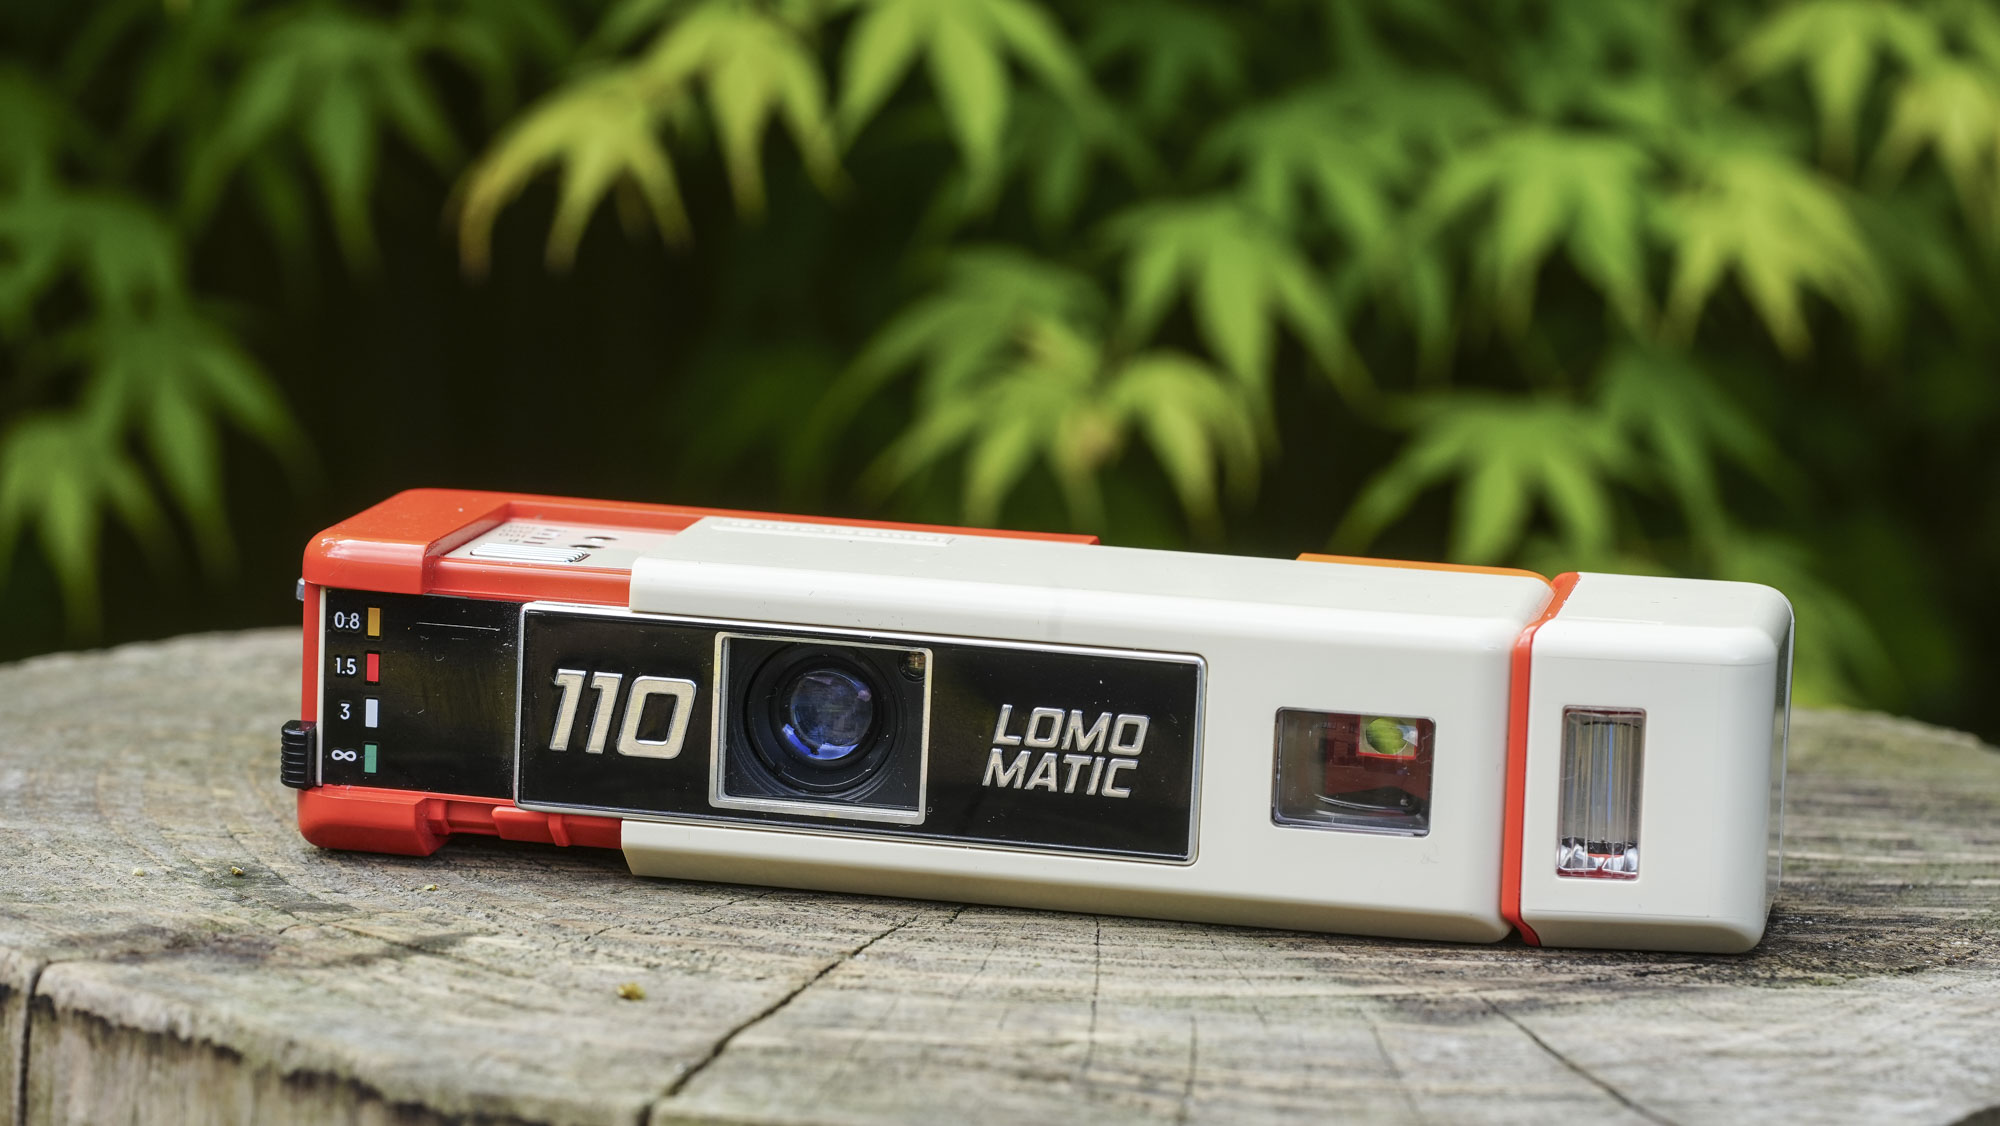 An image of the Lomography Lomomatic 110 film camera extended to reveal the lens